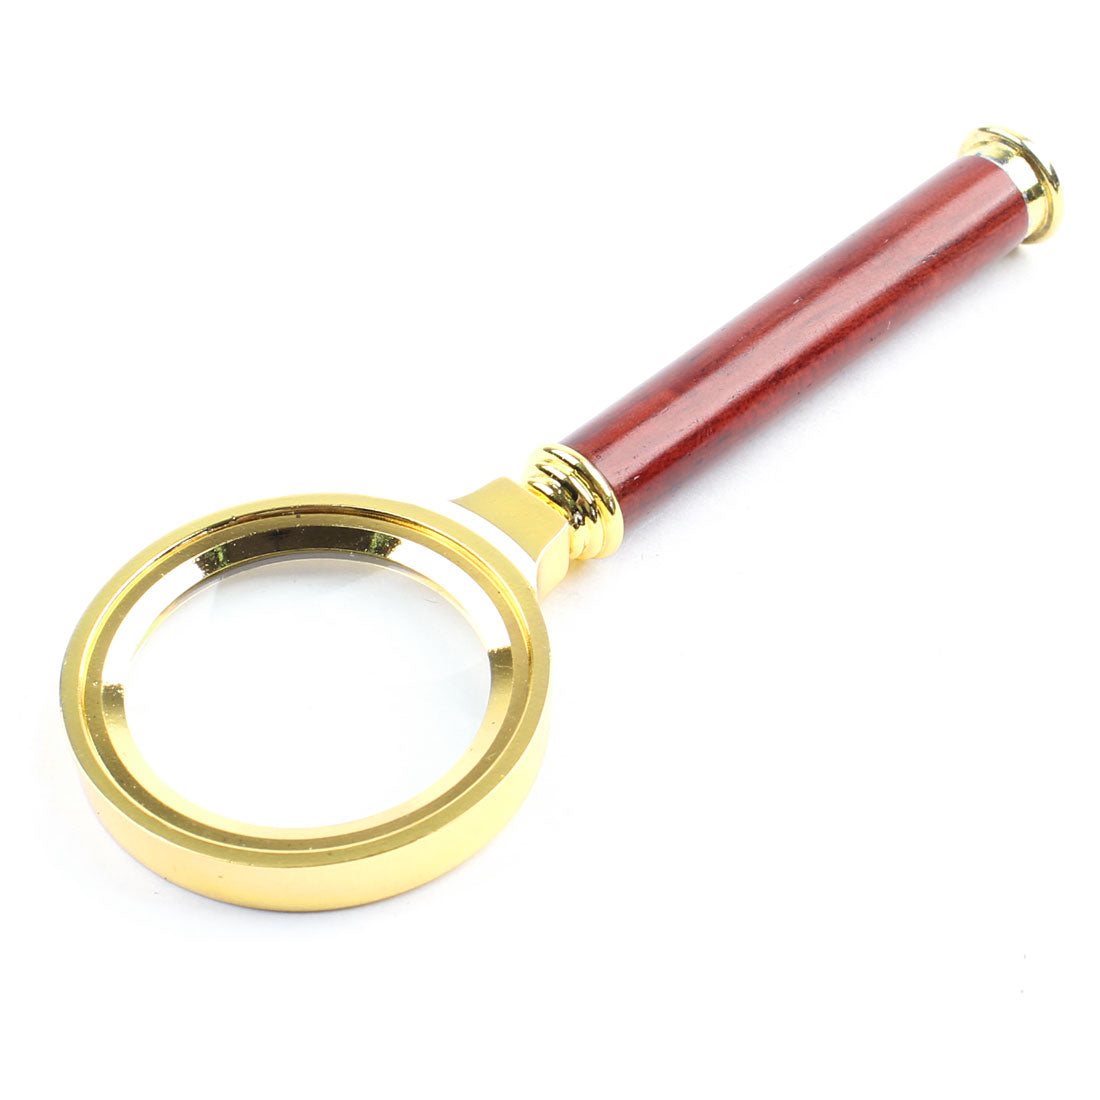 uxcell Uxcell Detachable Rosewood Handle 36mm Dia Hand Lens Magnifying Glass Magnifier 3X